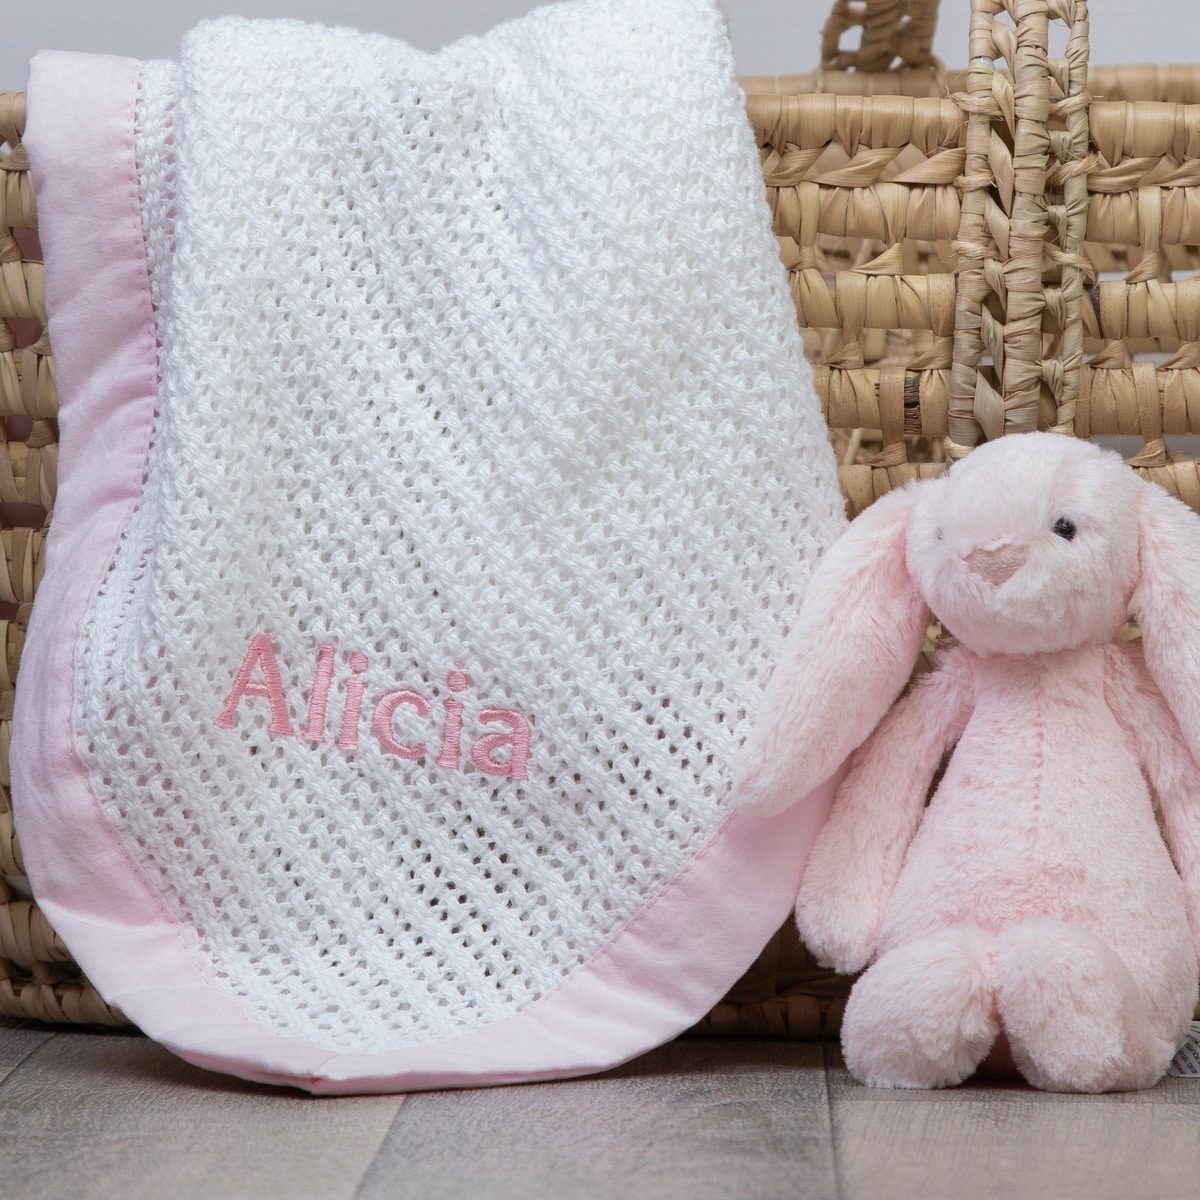 Ziggle personalised white cellular baby blanket with pink trim Blankets 2